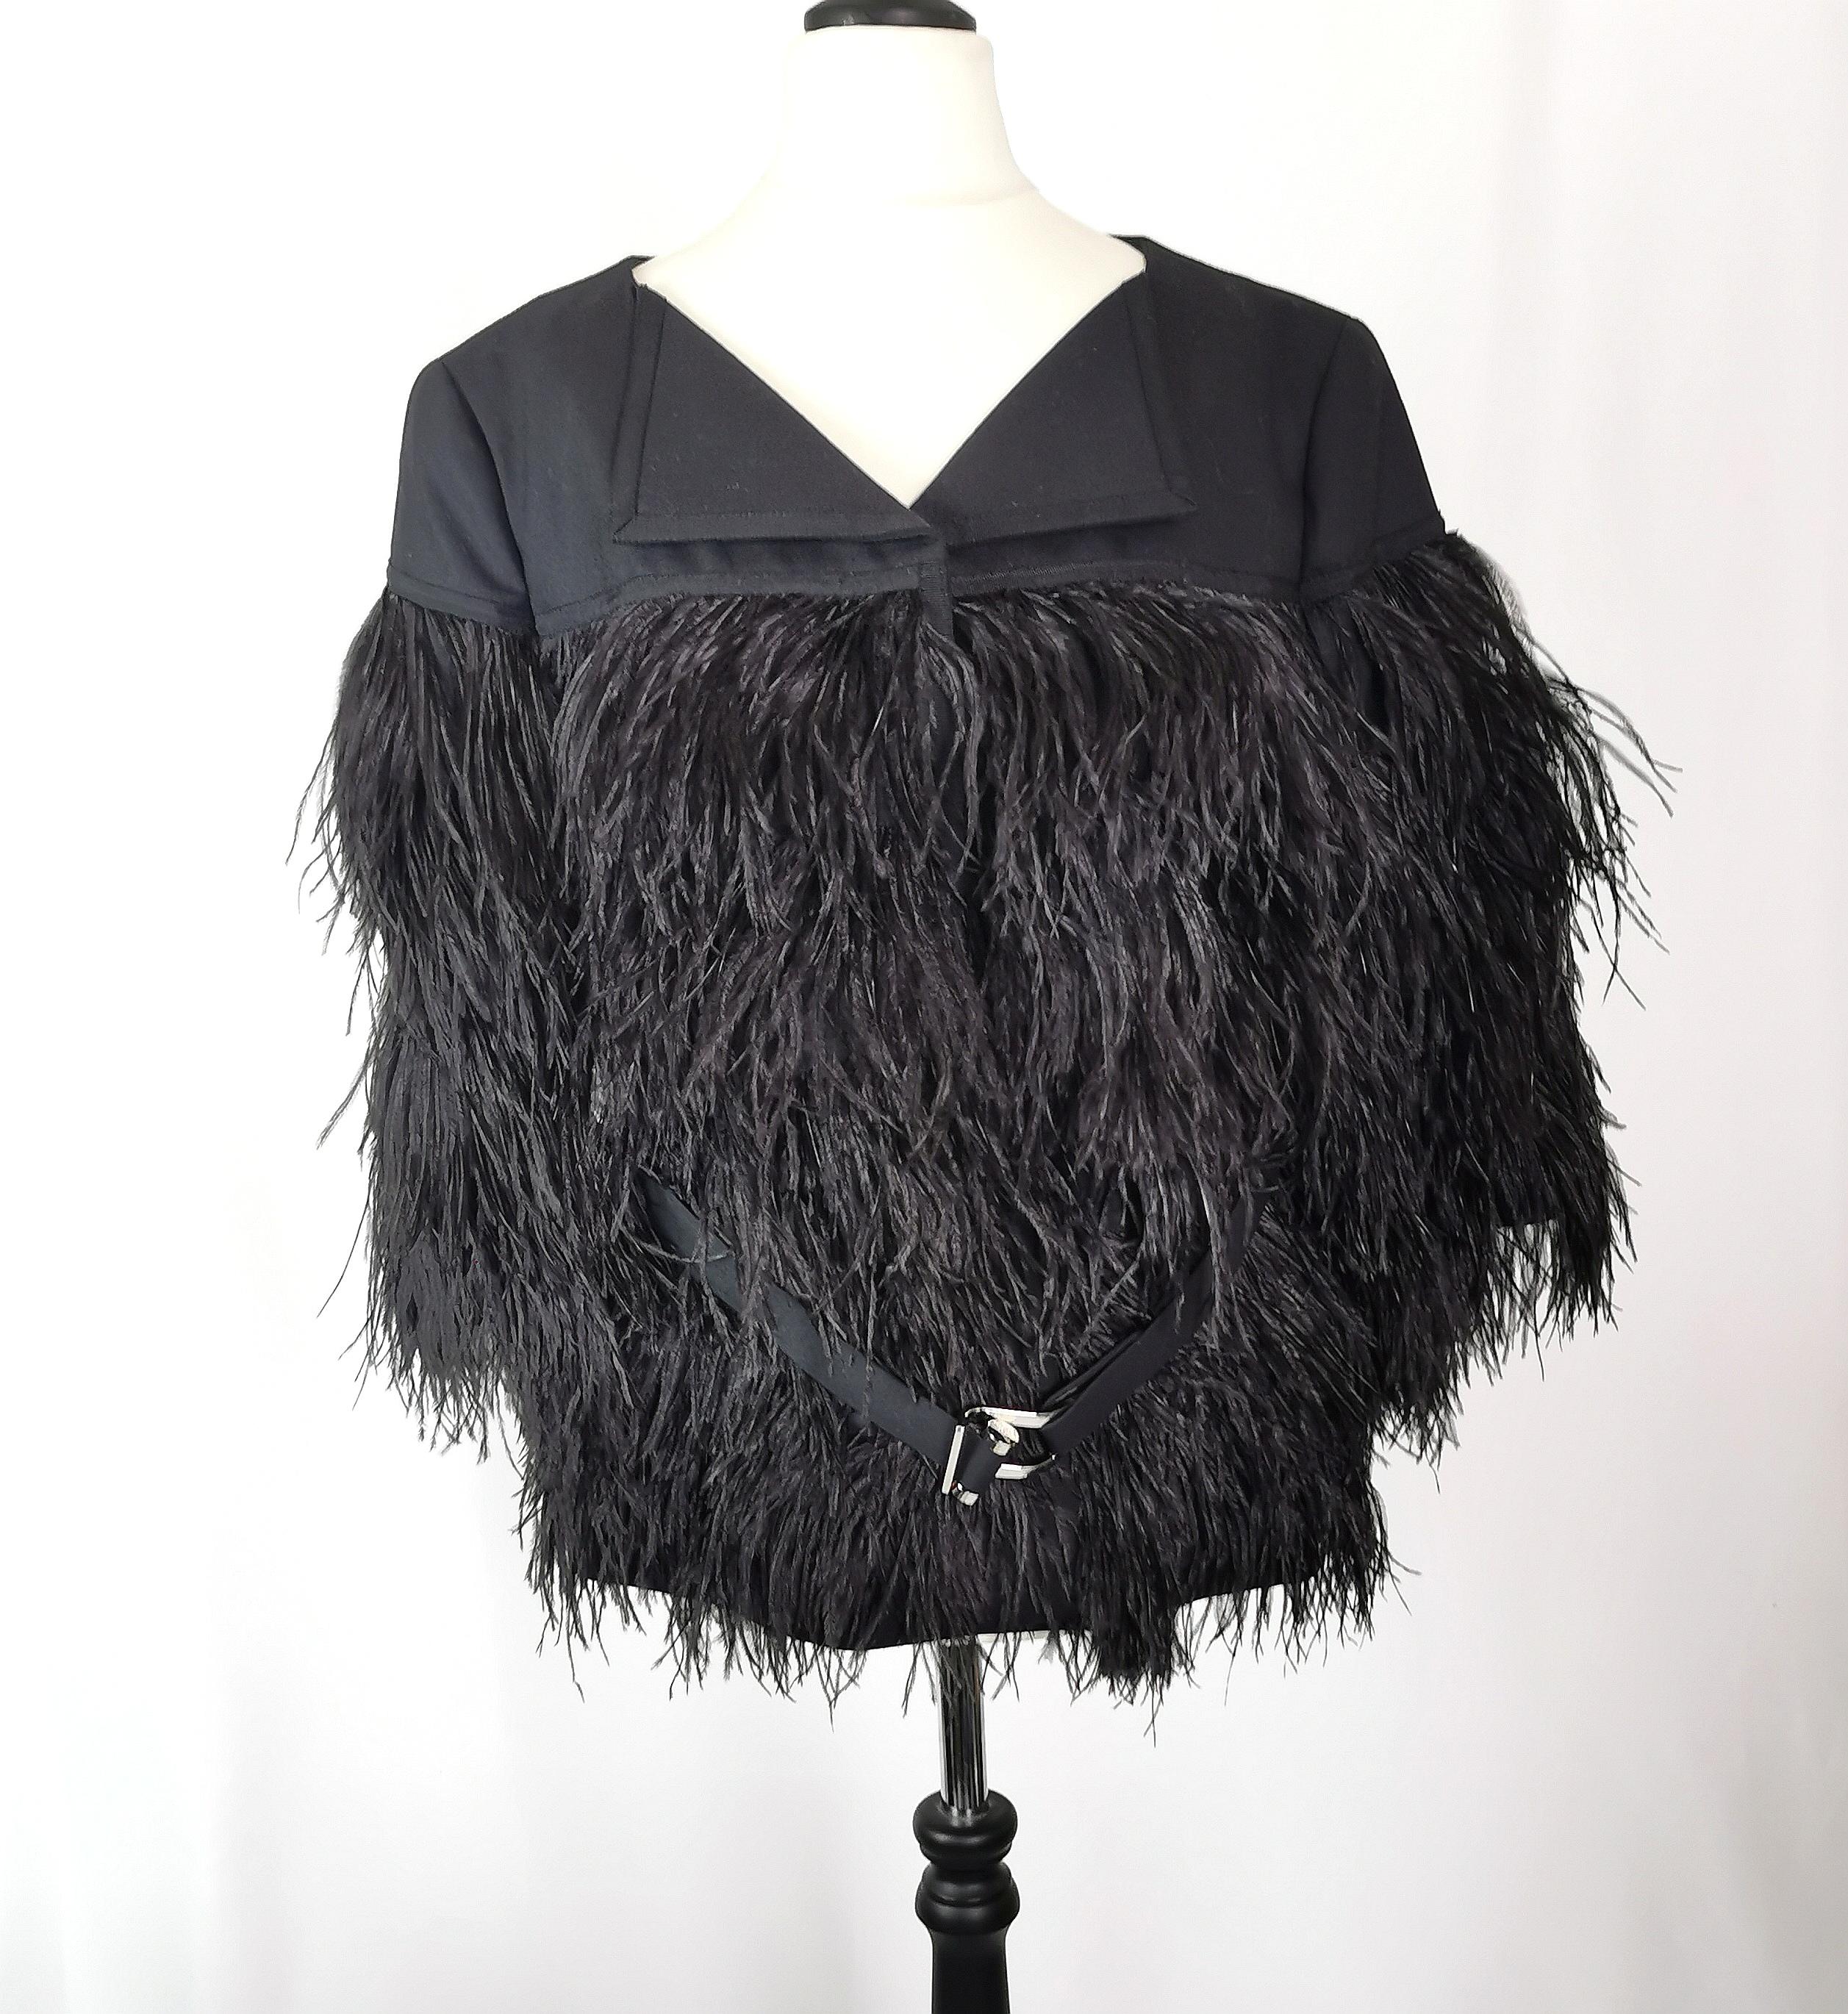 A gorgeous Escada ladies Black ostrich feather jacket.

The jacket is a boxy shape made from black woven mixed blend fabric, plain to the top half, shoulders and neck and covered all over with lush soft inky Black ostrich feathers all the way